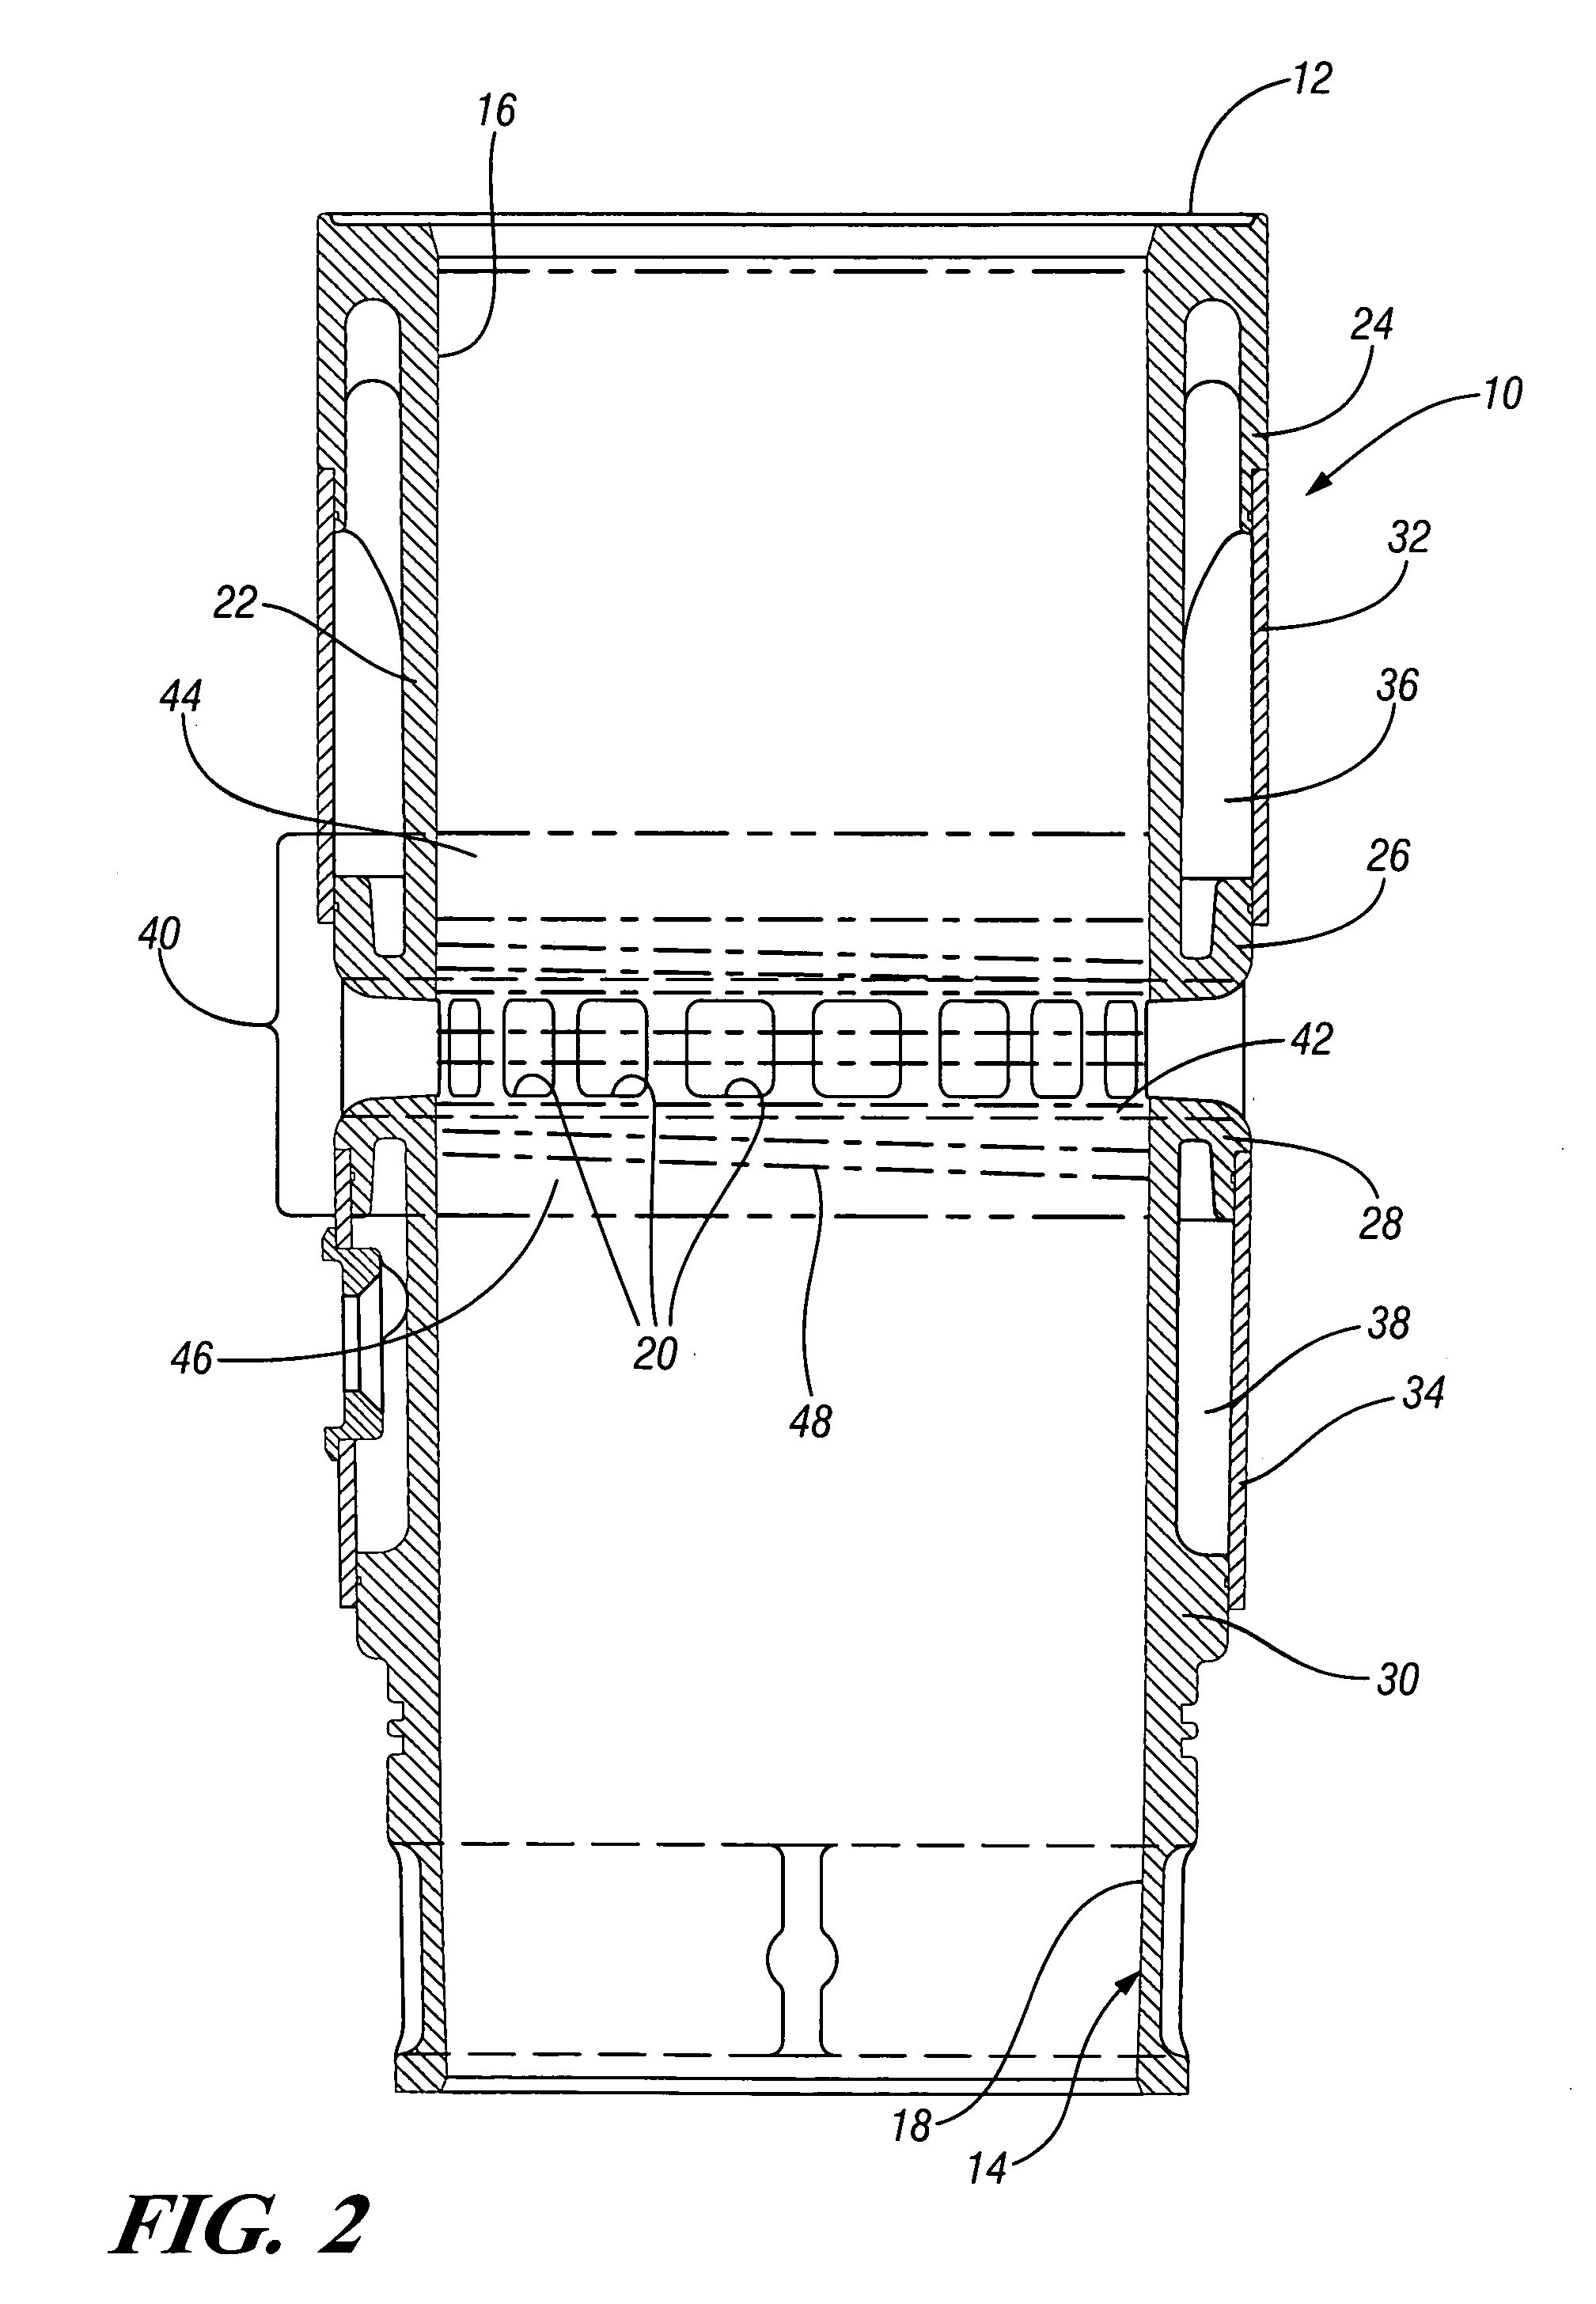 Ported engine cylinder liner with selectively laser-hardened and induction-hardened bore